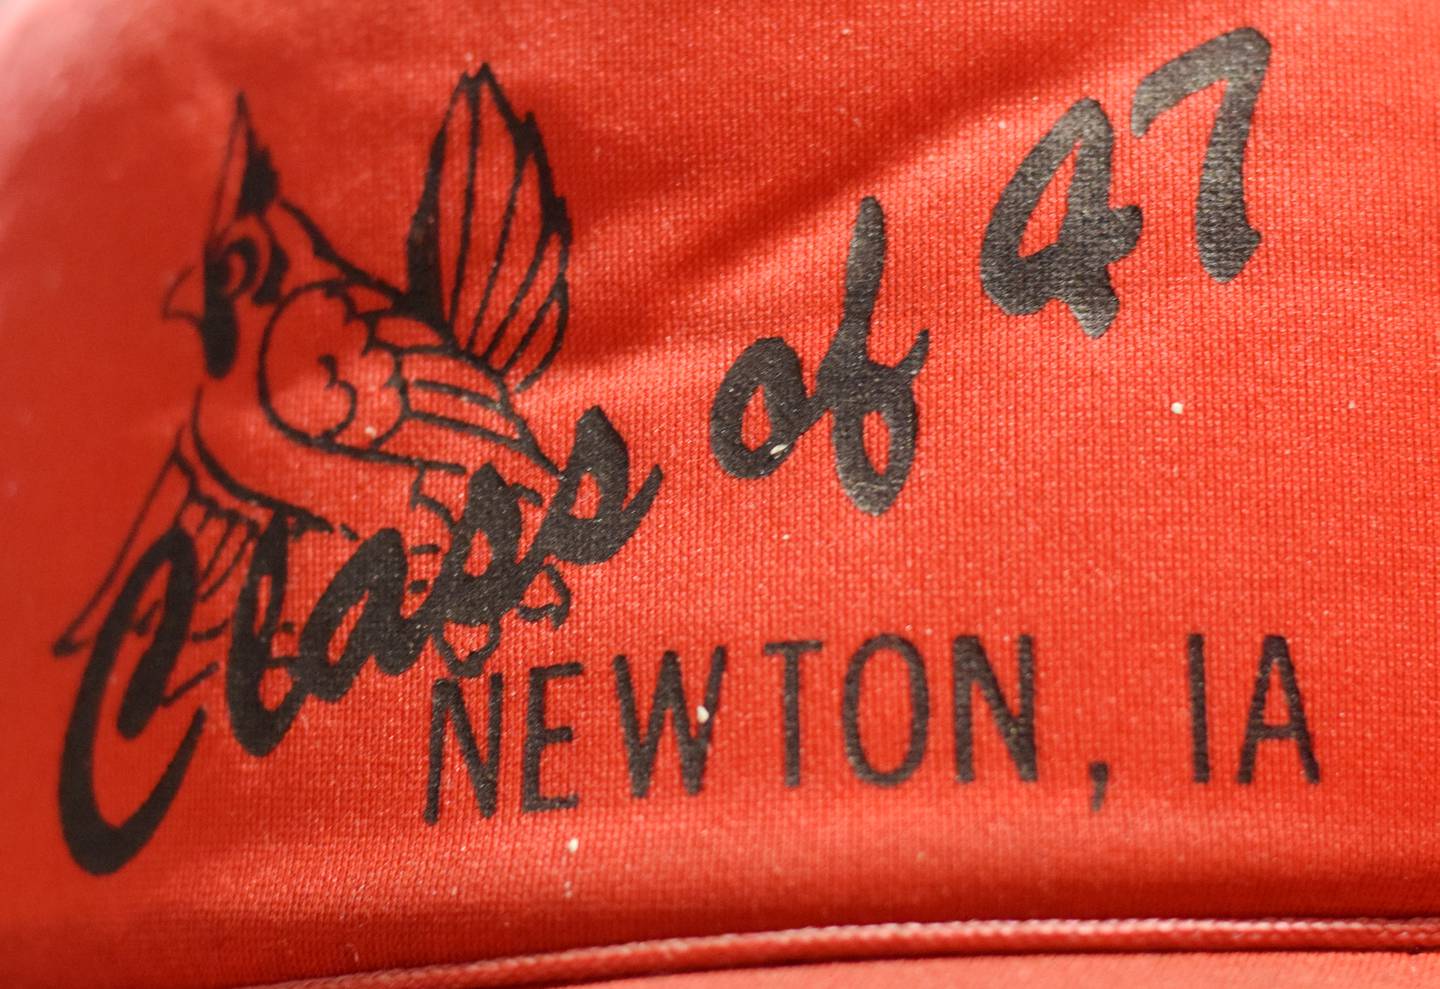 The Class of 1947 is printed on a hat owned by 93-year-old Avery Wilson.